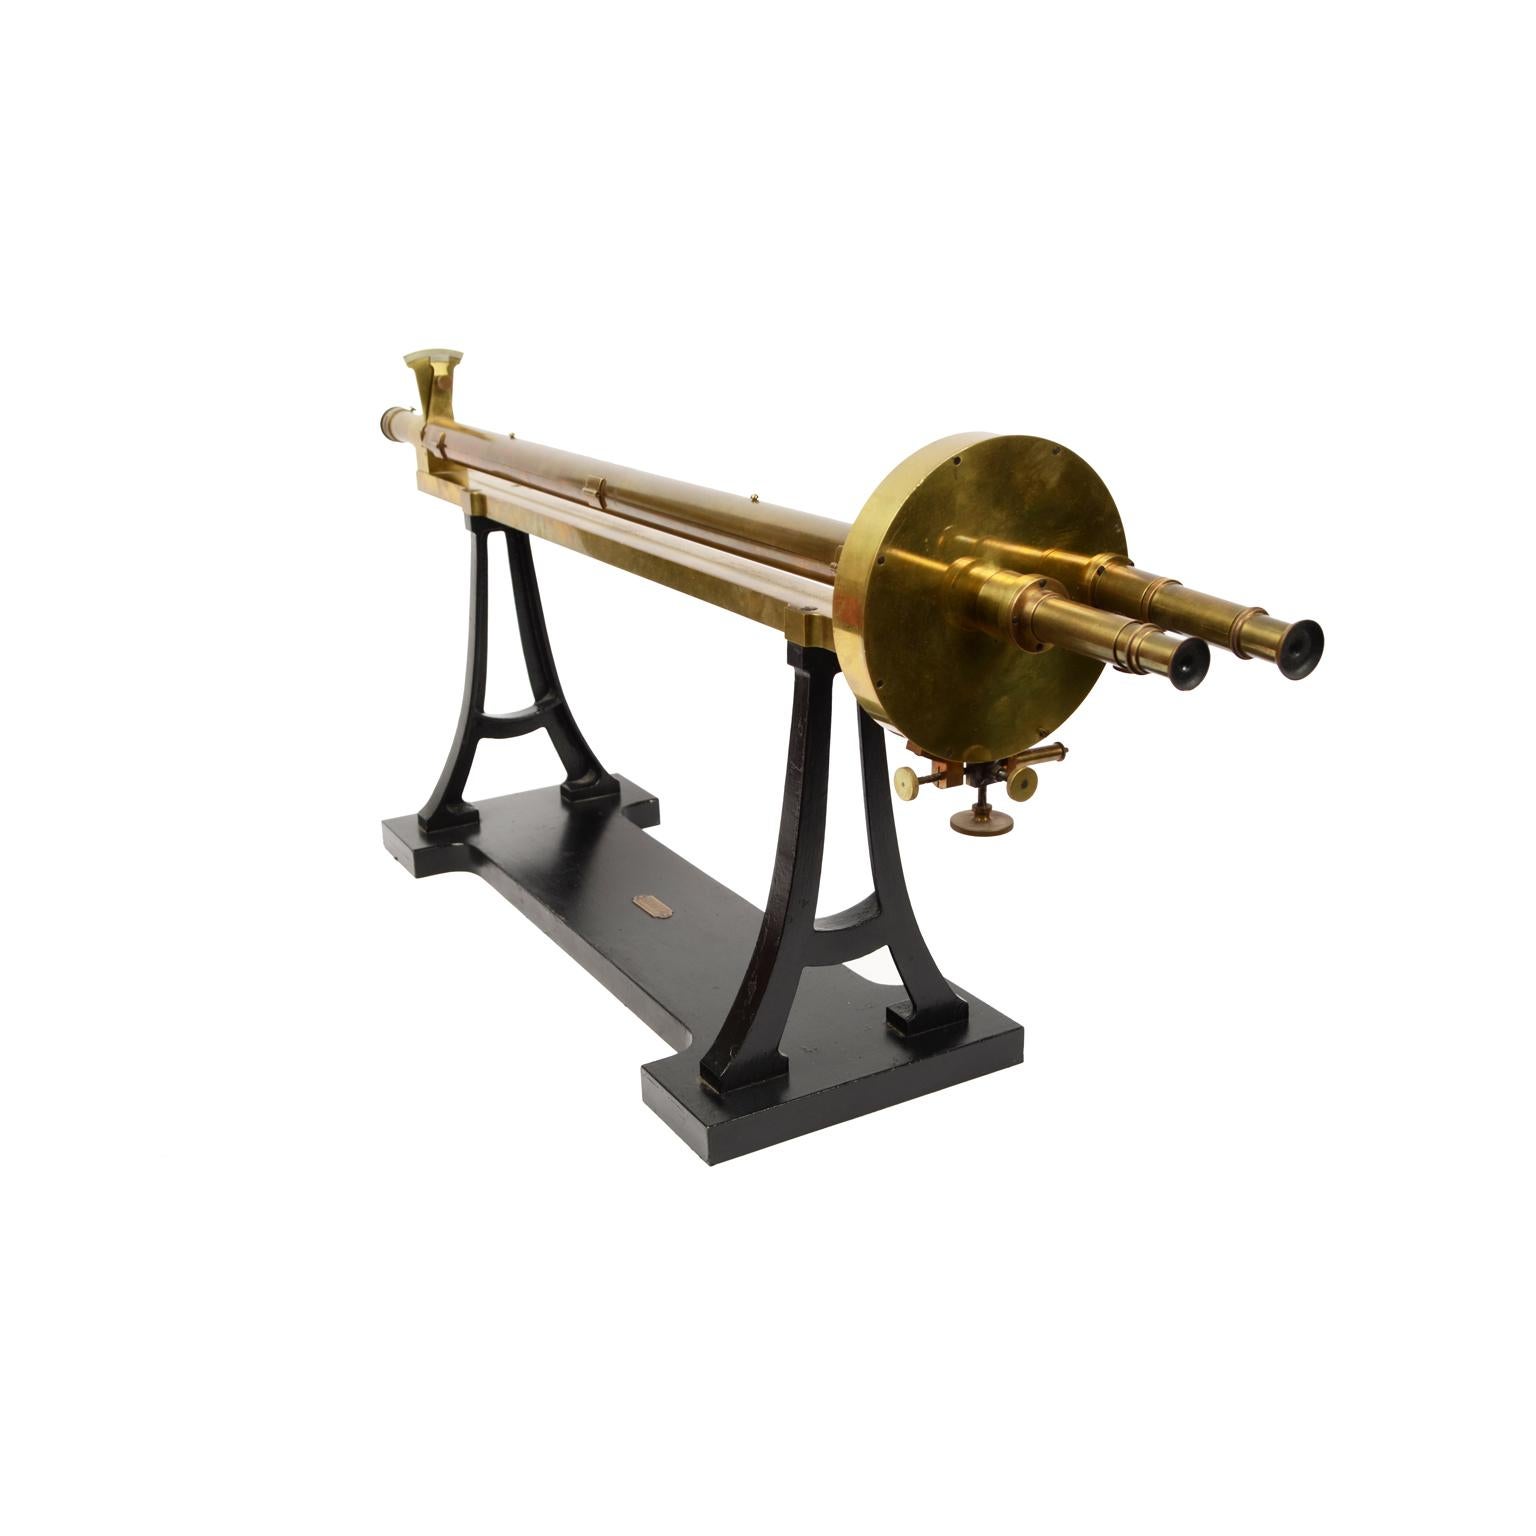 Lippich polarimeter, scientifi instrument made in 1893 signed Societé Genevoise Genève, brass and black metal. It is an optical instrument of analysis used to determine the concentration of sucrose and glucose in raw materials and sugary food.